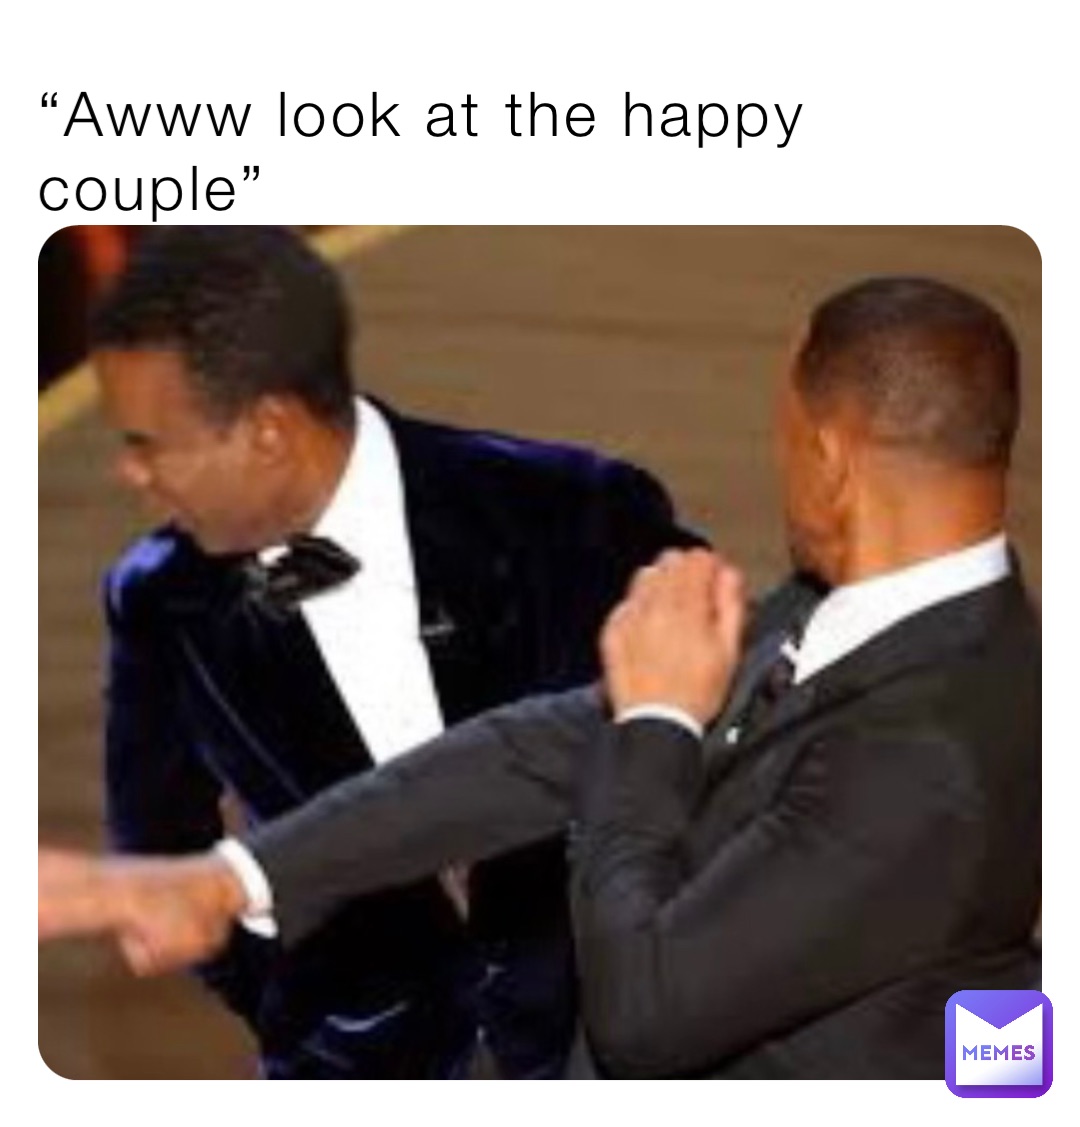 “Awww look at the happy couple”